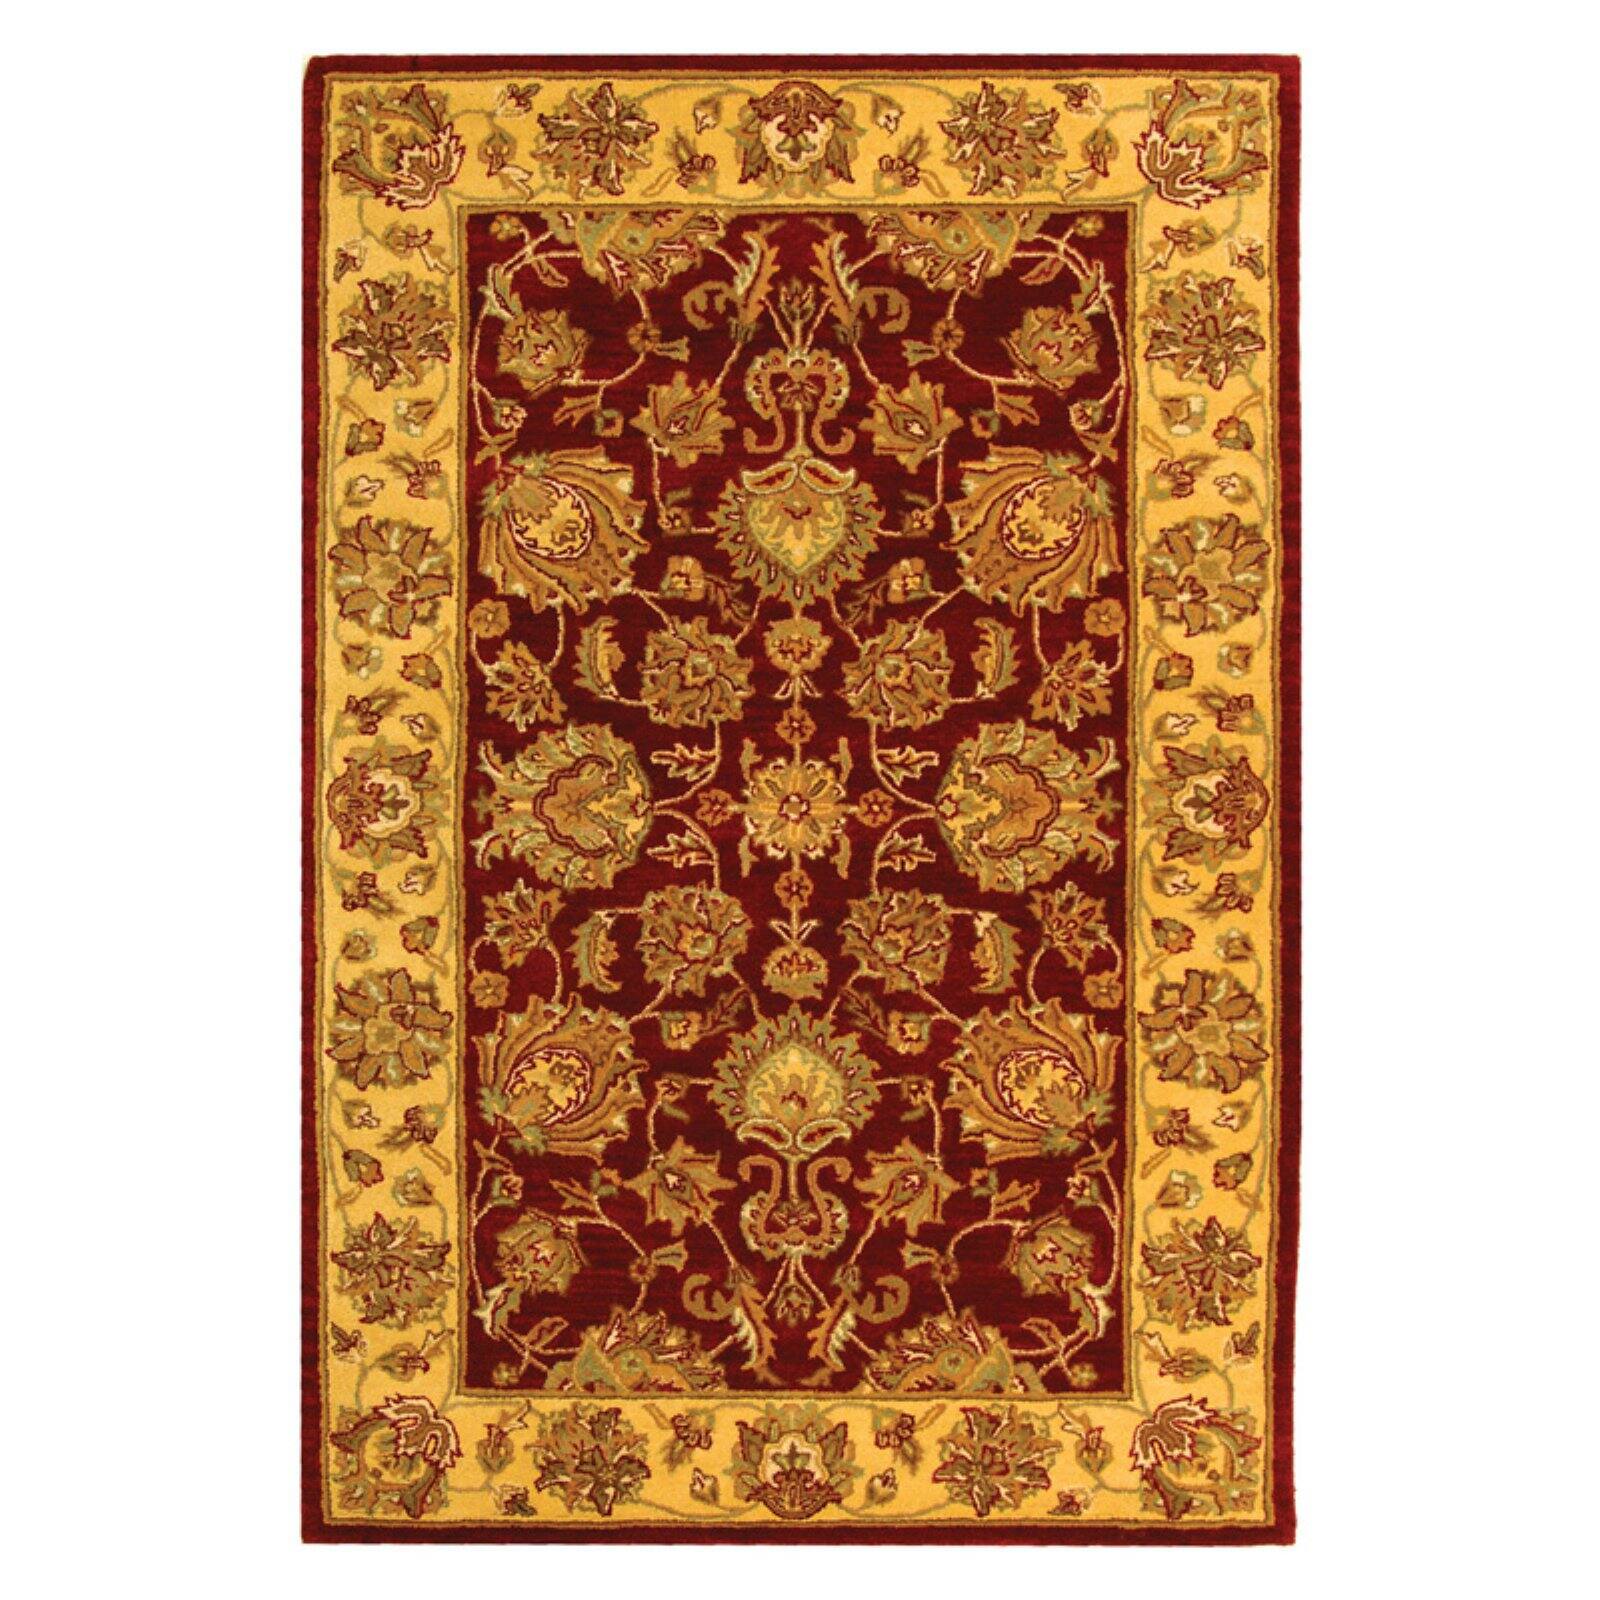 SAFAVIEH Heritage Regis Traditional Wool Area Rug, Red/Gold, 2'3" x 4' - image 4 of 9